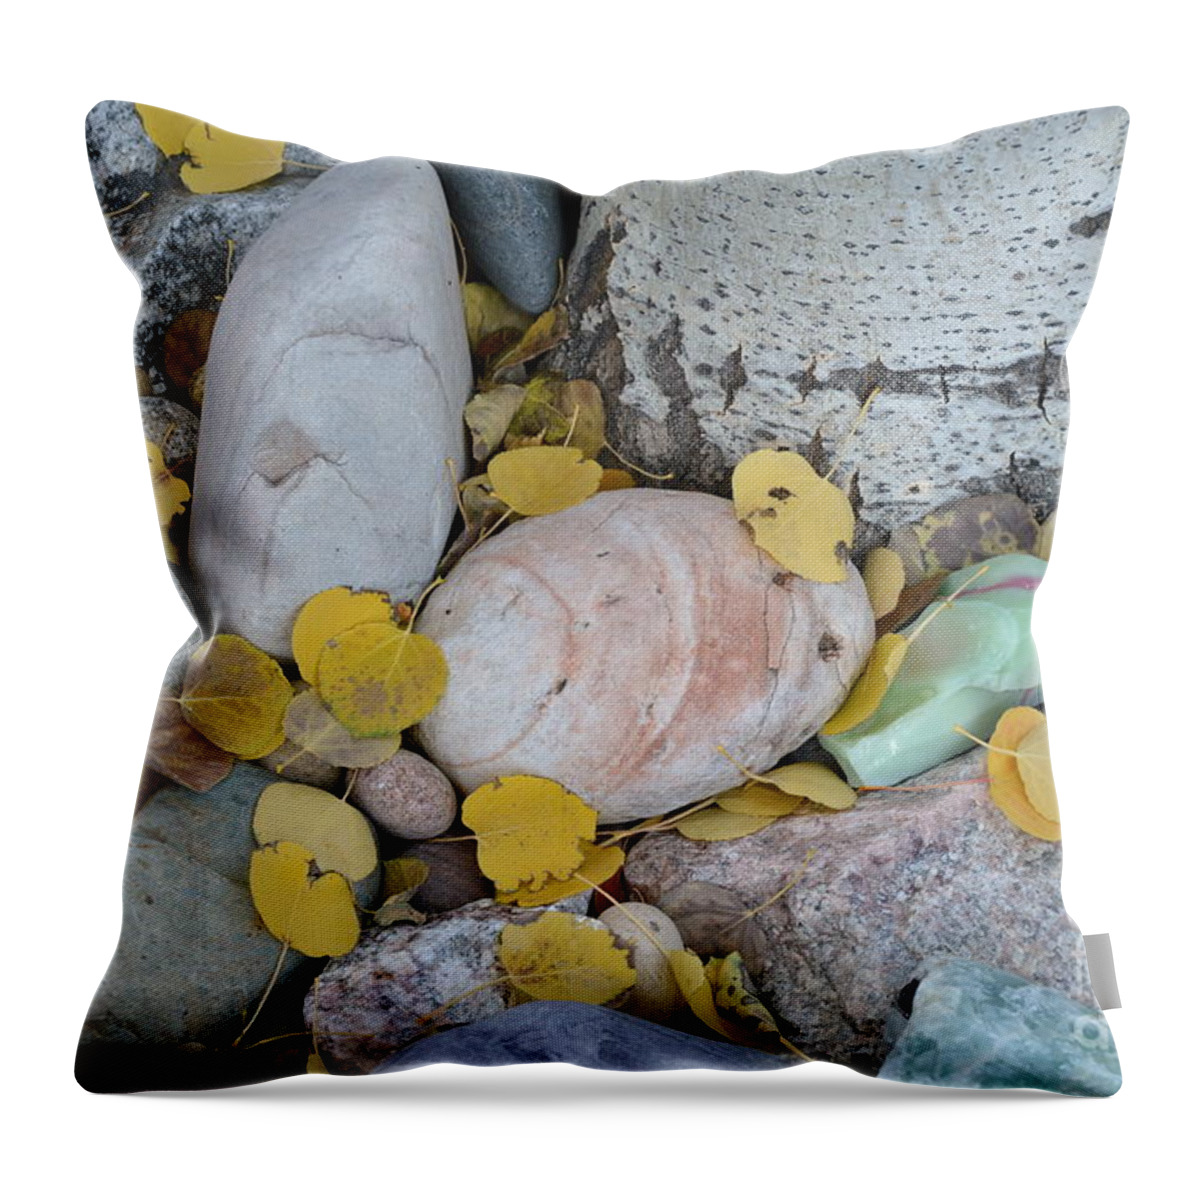 Aspen Throw Pillow featuring the photograph Aspen Leaves on the Rocks by Dorrene BrownButterfield